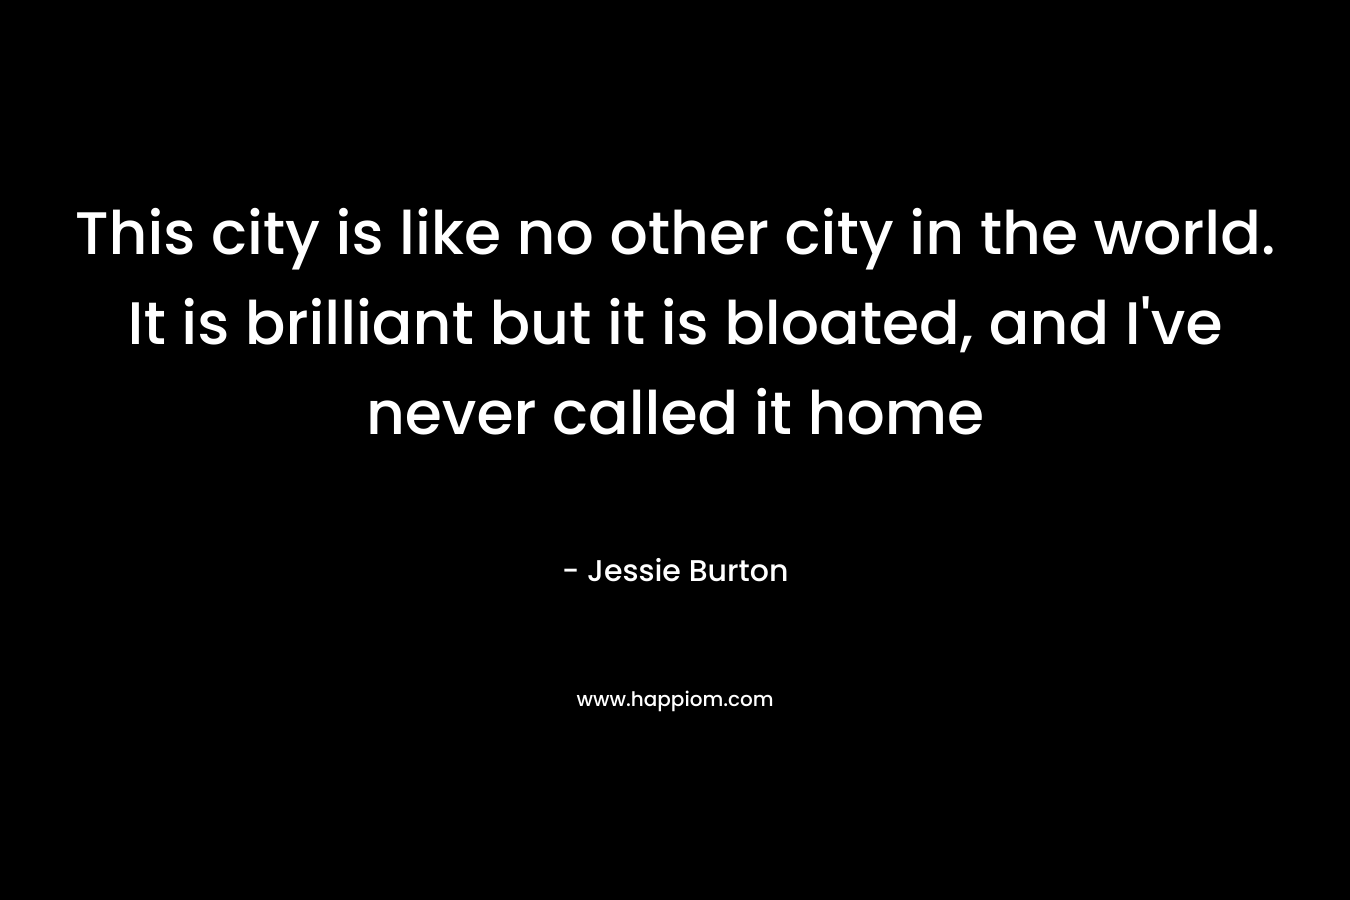 This city is like no other city in the world. It is brilliant but it is bloated, and I’ve never called it home – Jessie Burton